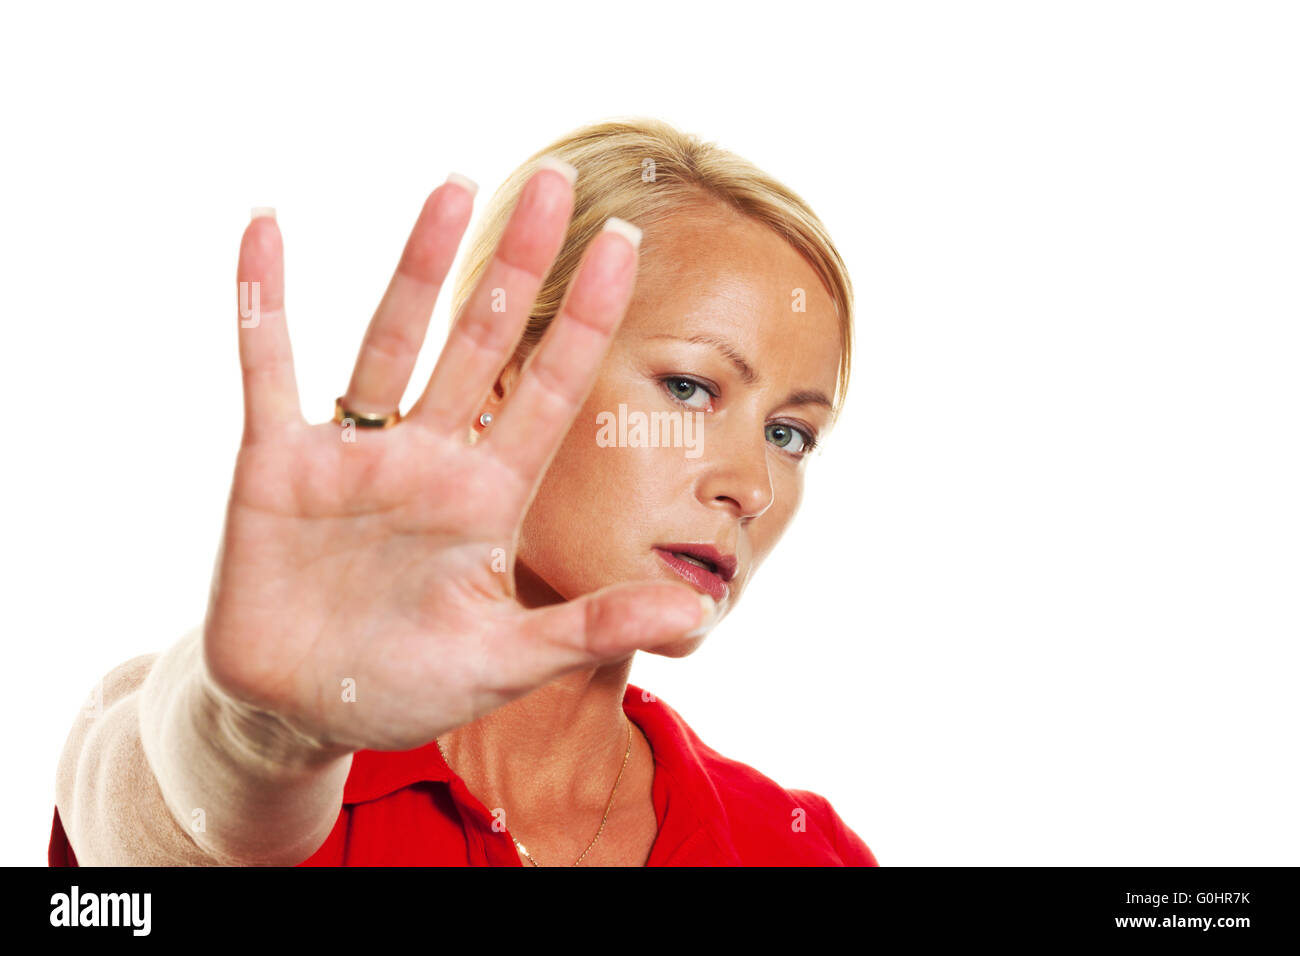 Woman holding hands in front of her face. Stock Photo